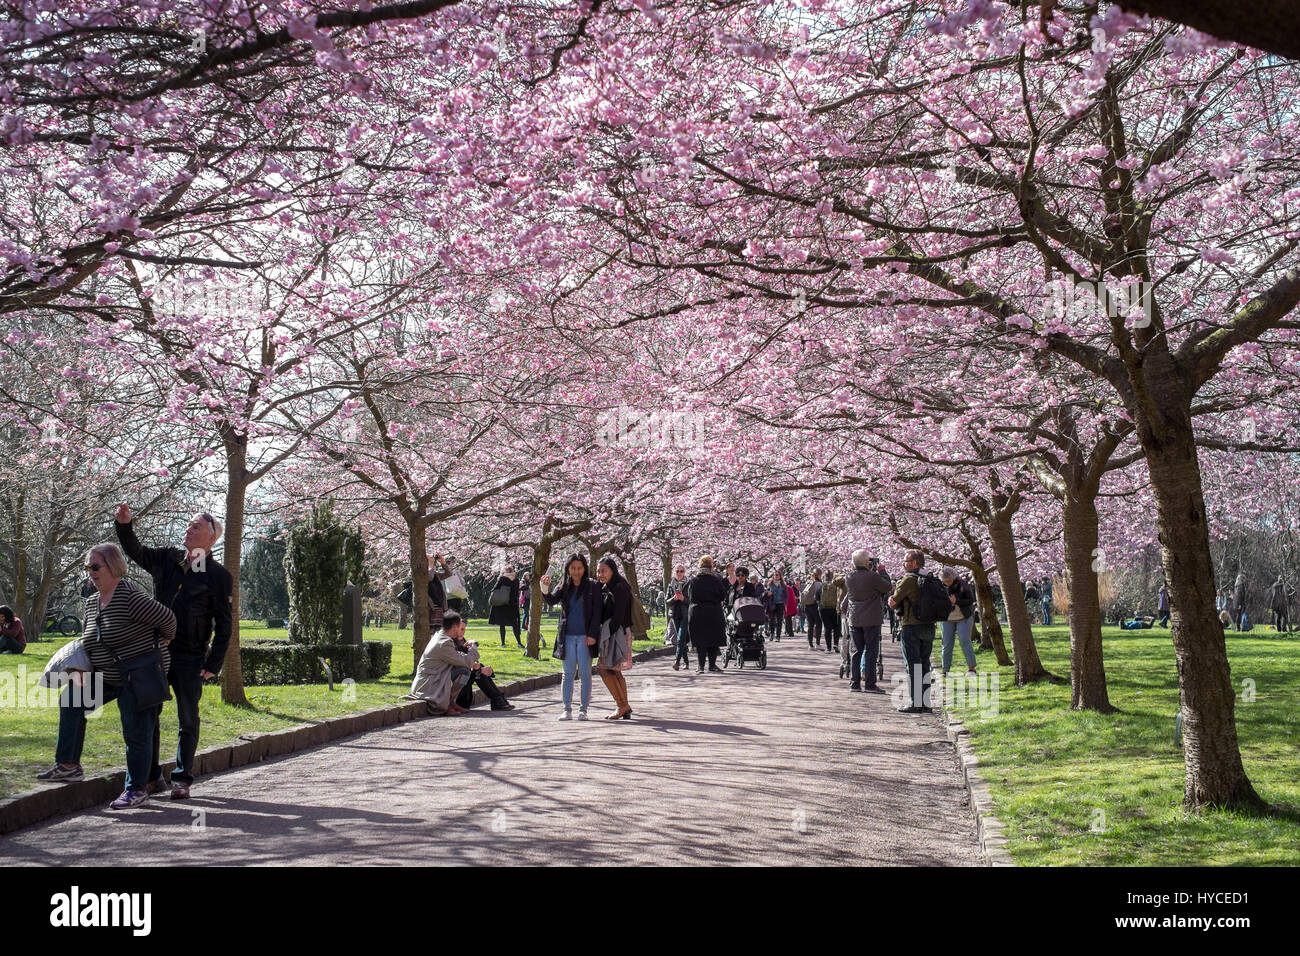 Spring arrives in Denmark. Once a year locals and tourists flock to Bispebjerg Cemetery, Copenhagen to enjoy the avenue of pink cherry tree blossoms. Stock Photo